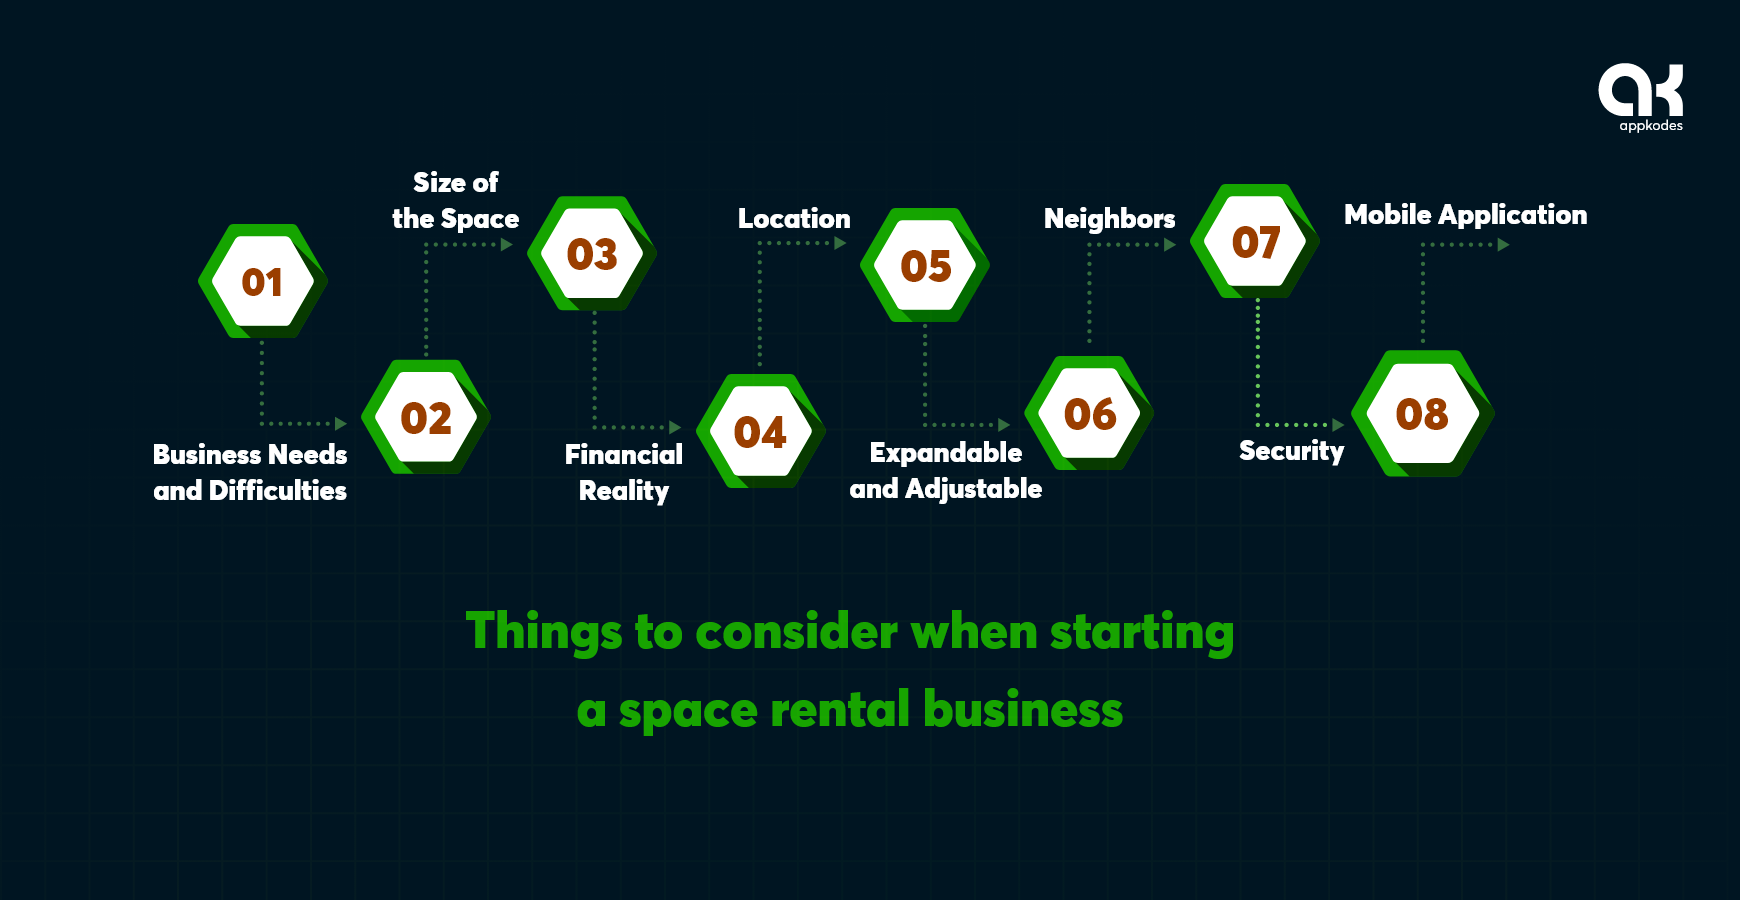 Things to consider when starting a space rental business